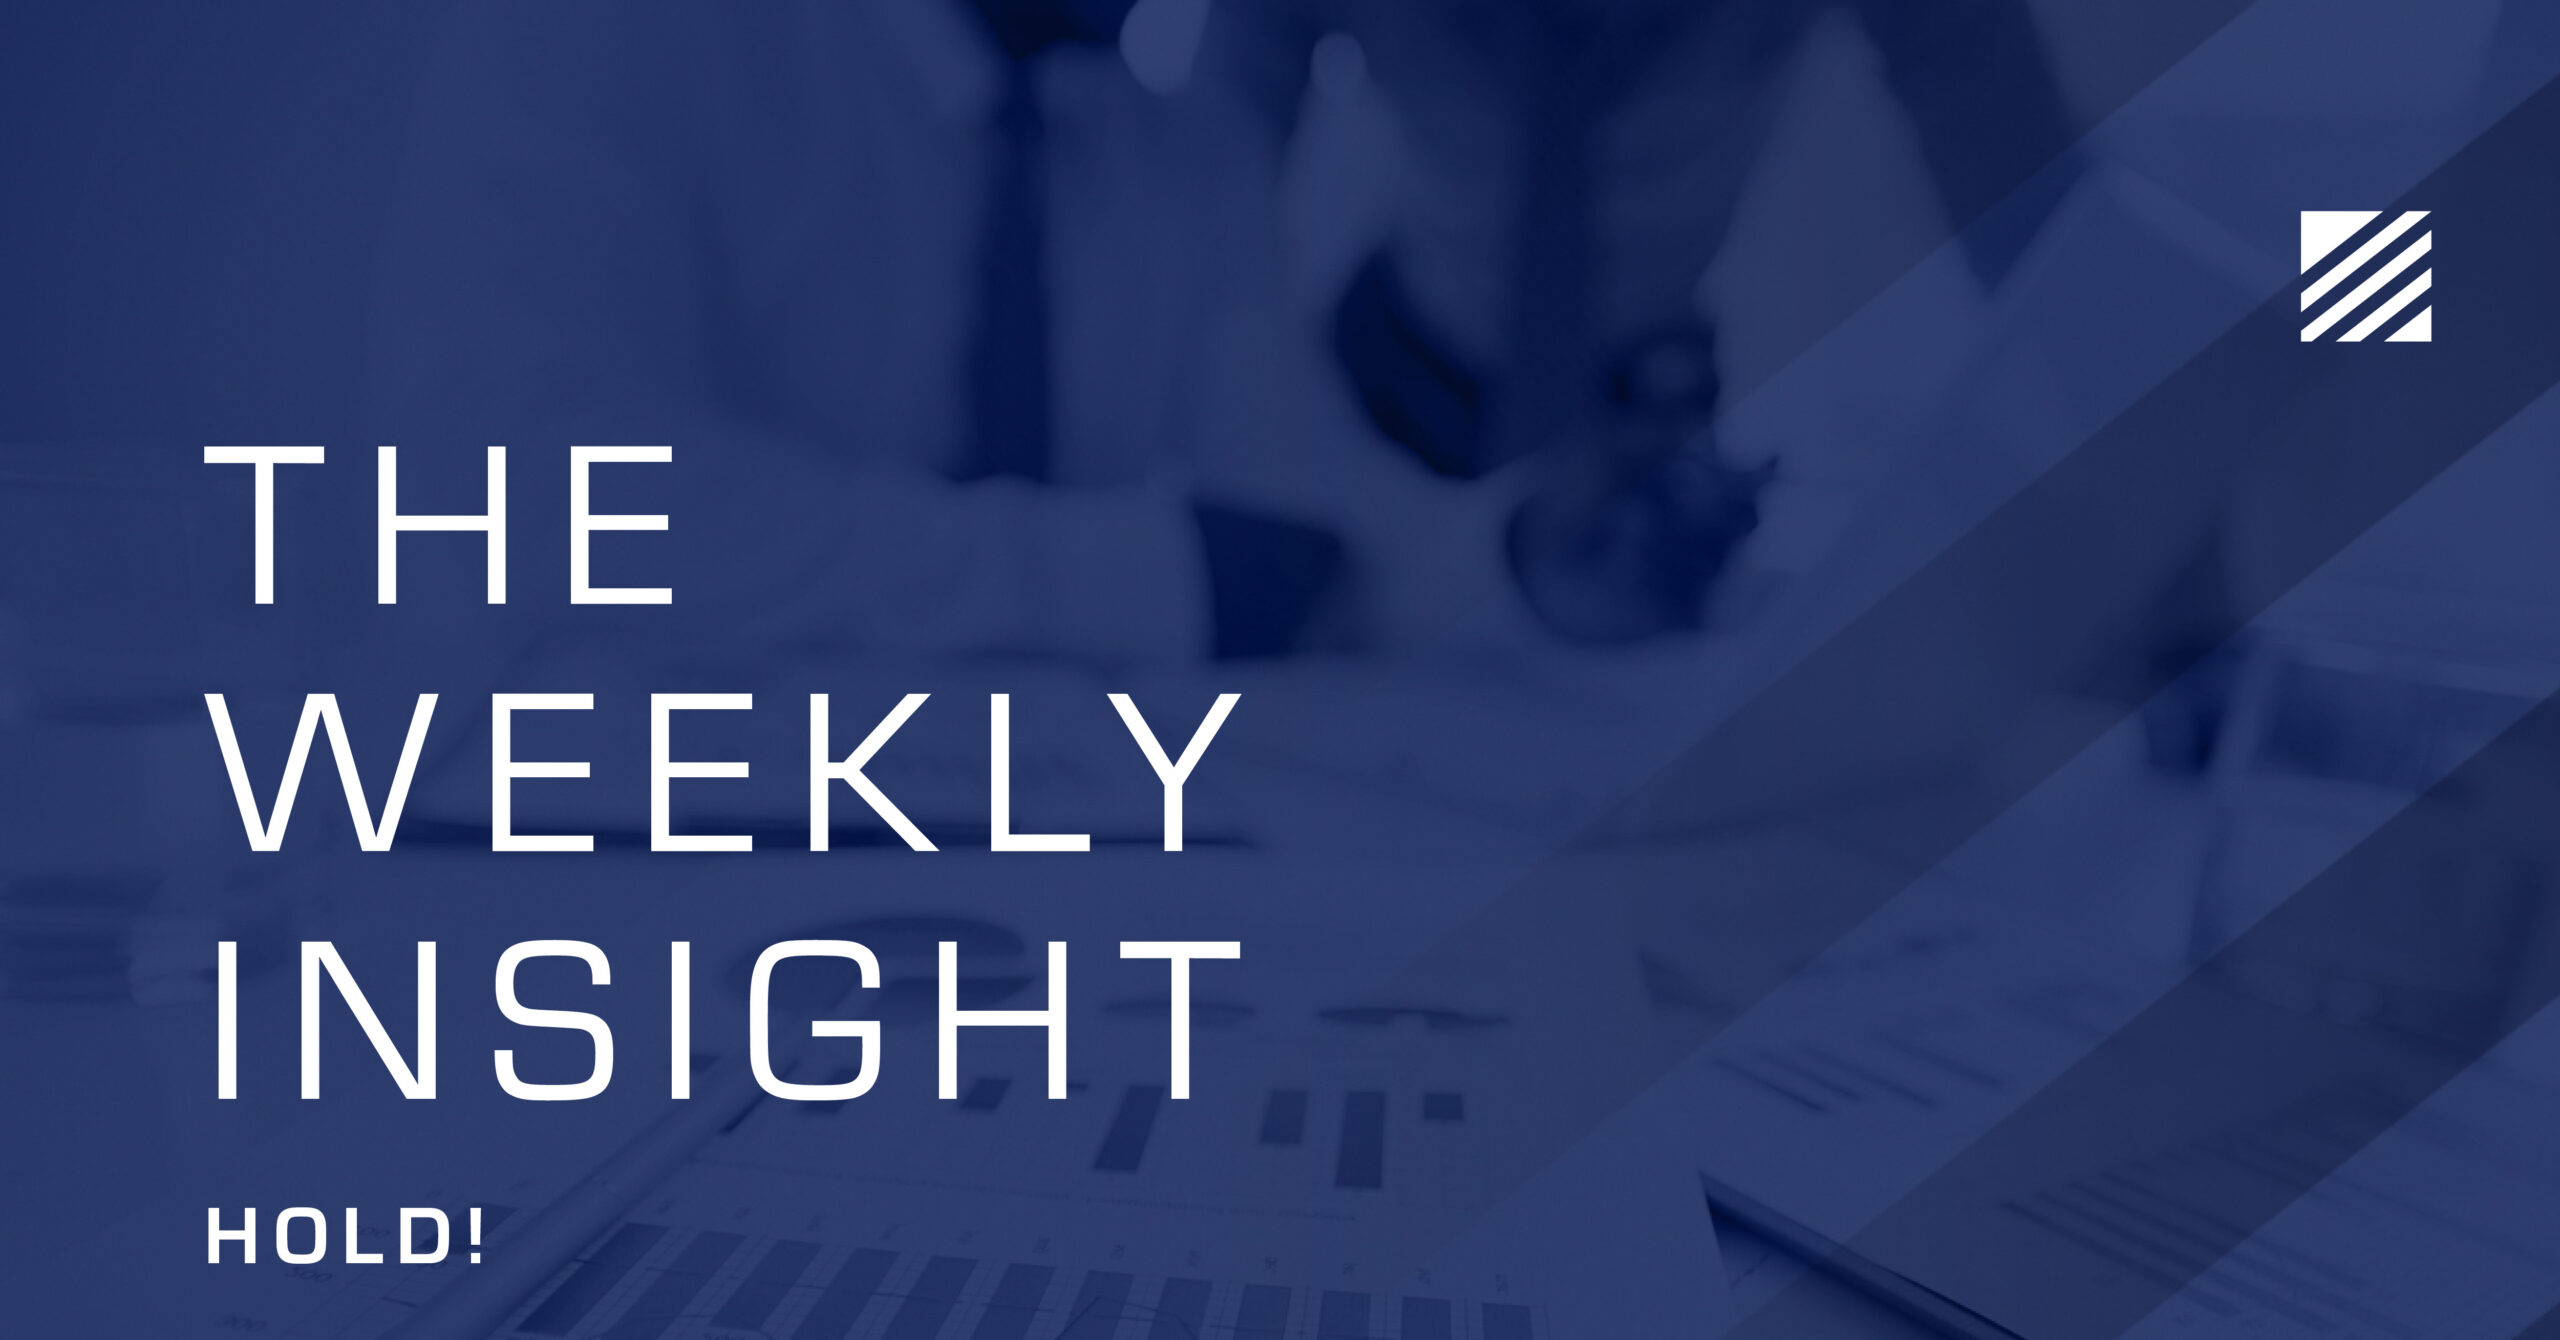 The Weekly Insight: Hold! Graphic